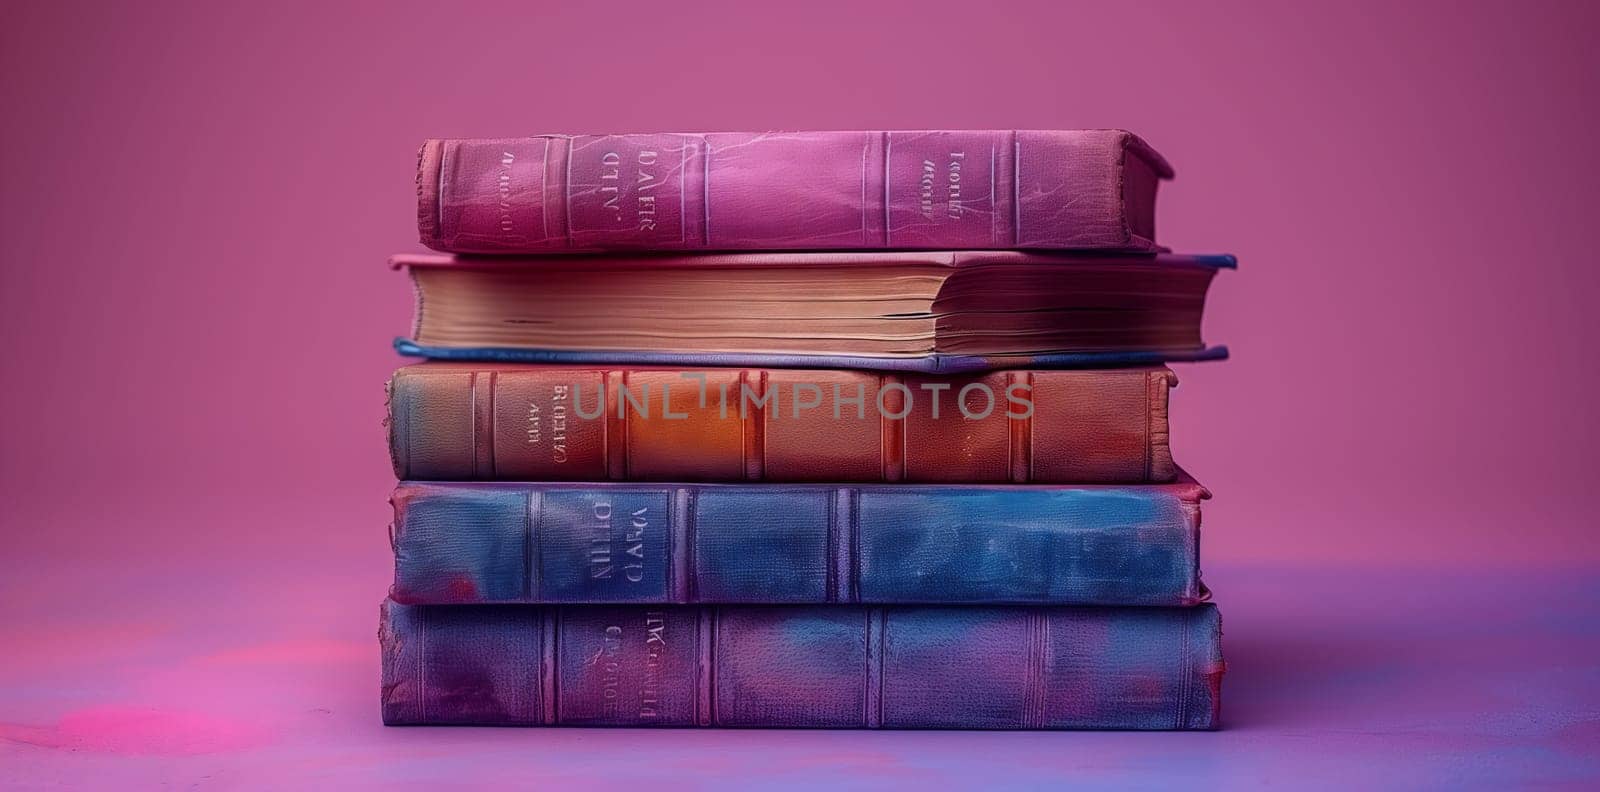 A stack of books in a variety of colors such as violet, magenta and electric blue, sitting on a wood surface against a purple background